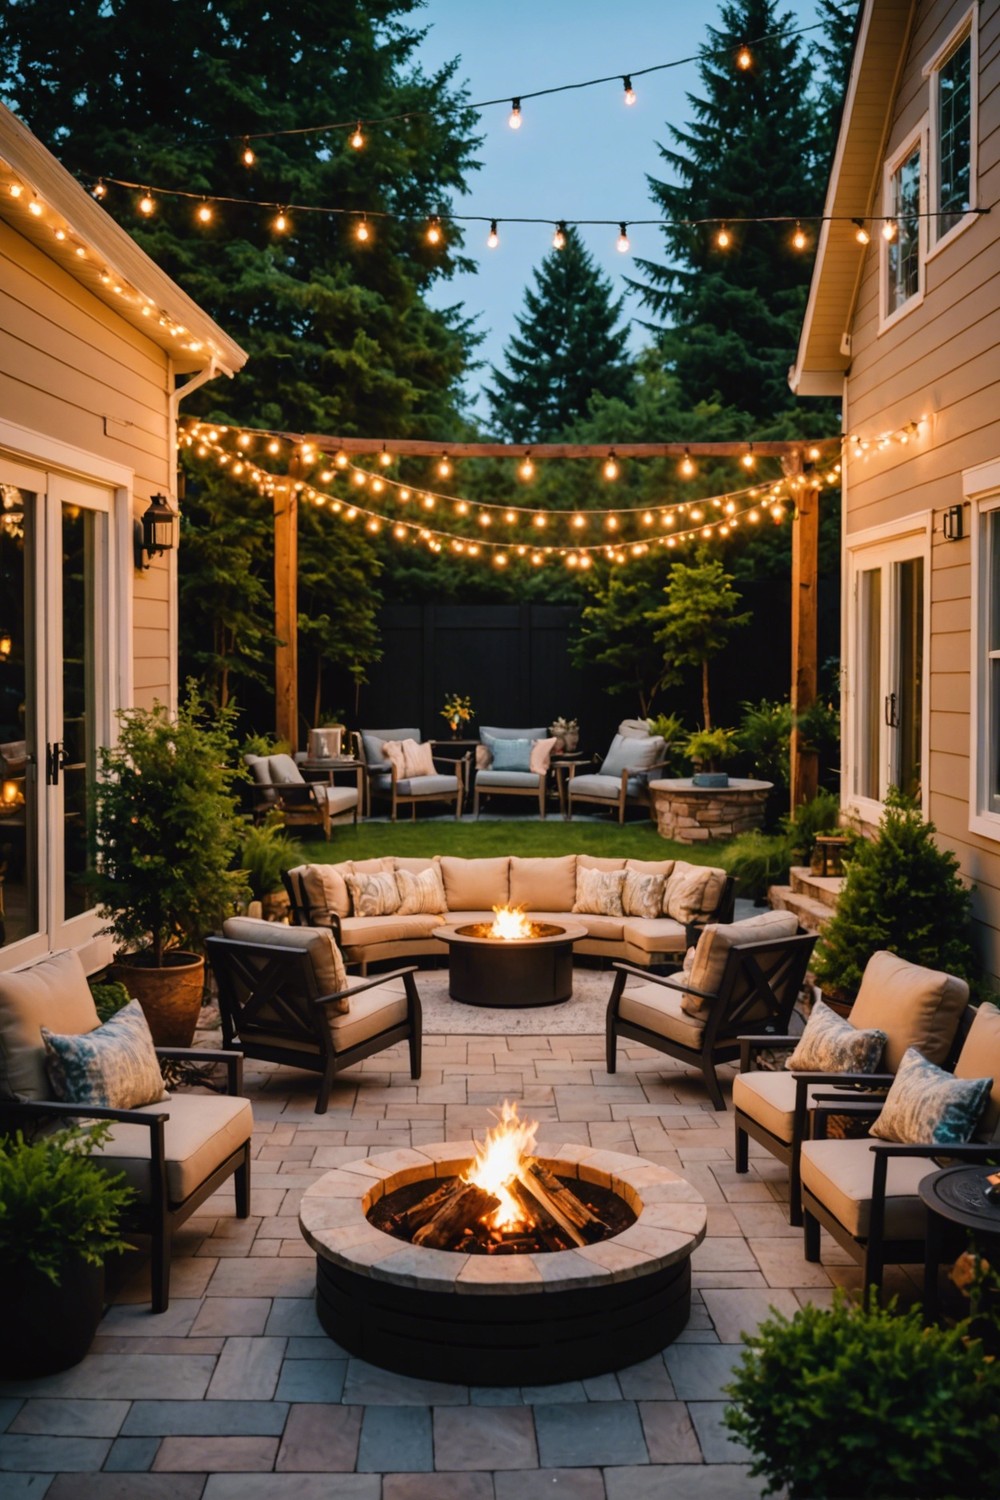 Outdoor Fire Pit for Chilly Nights